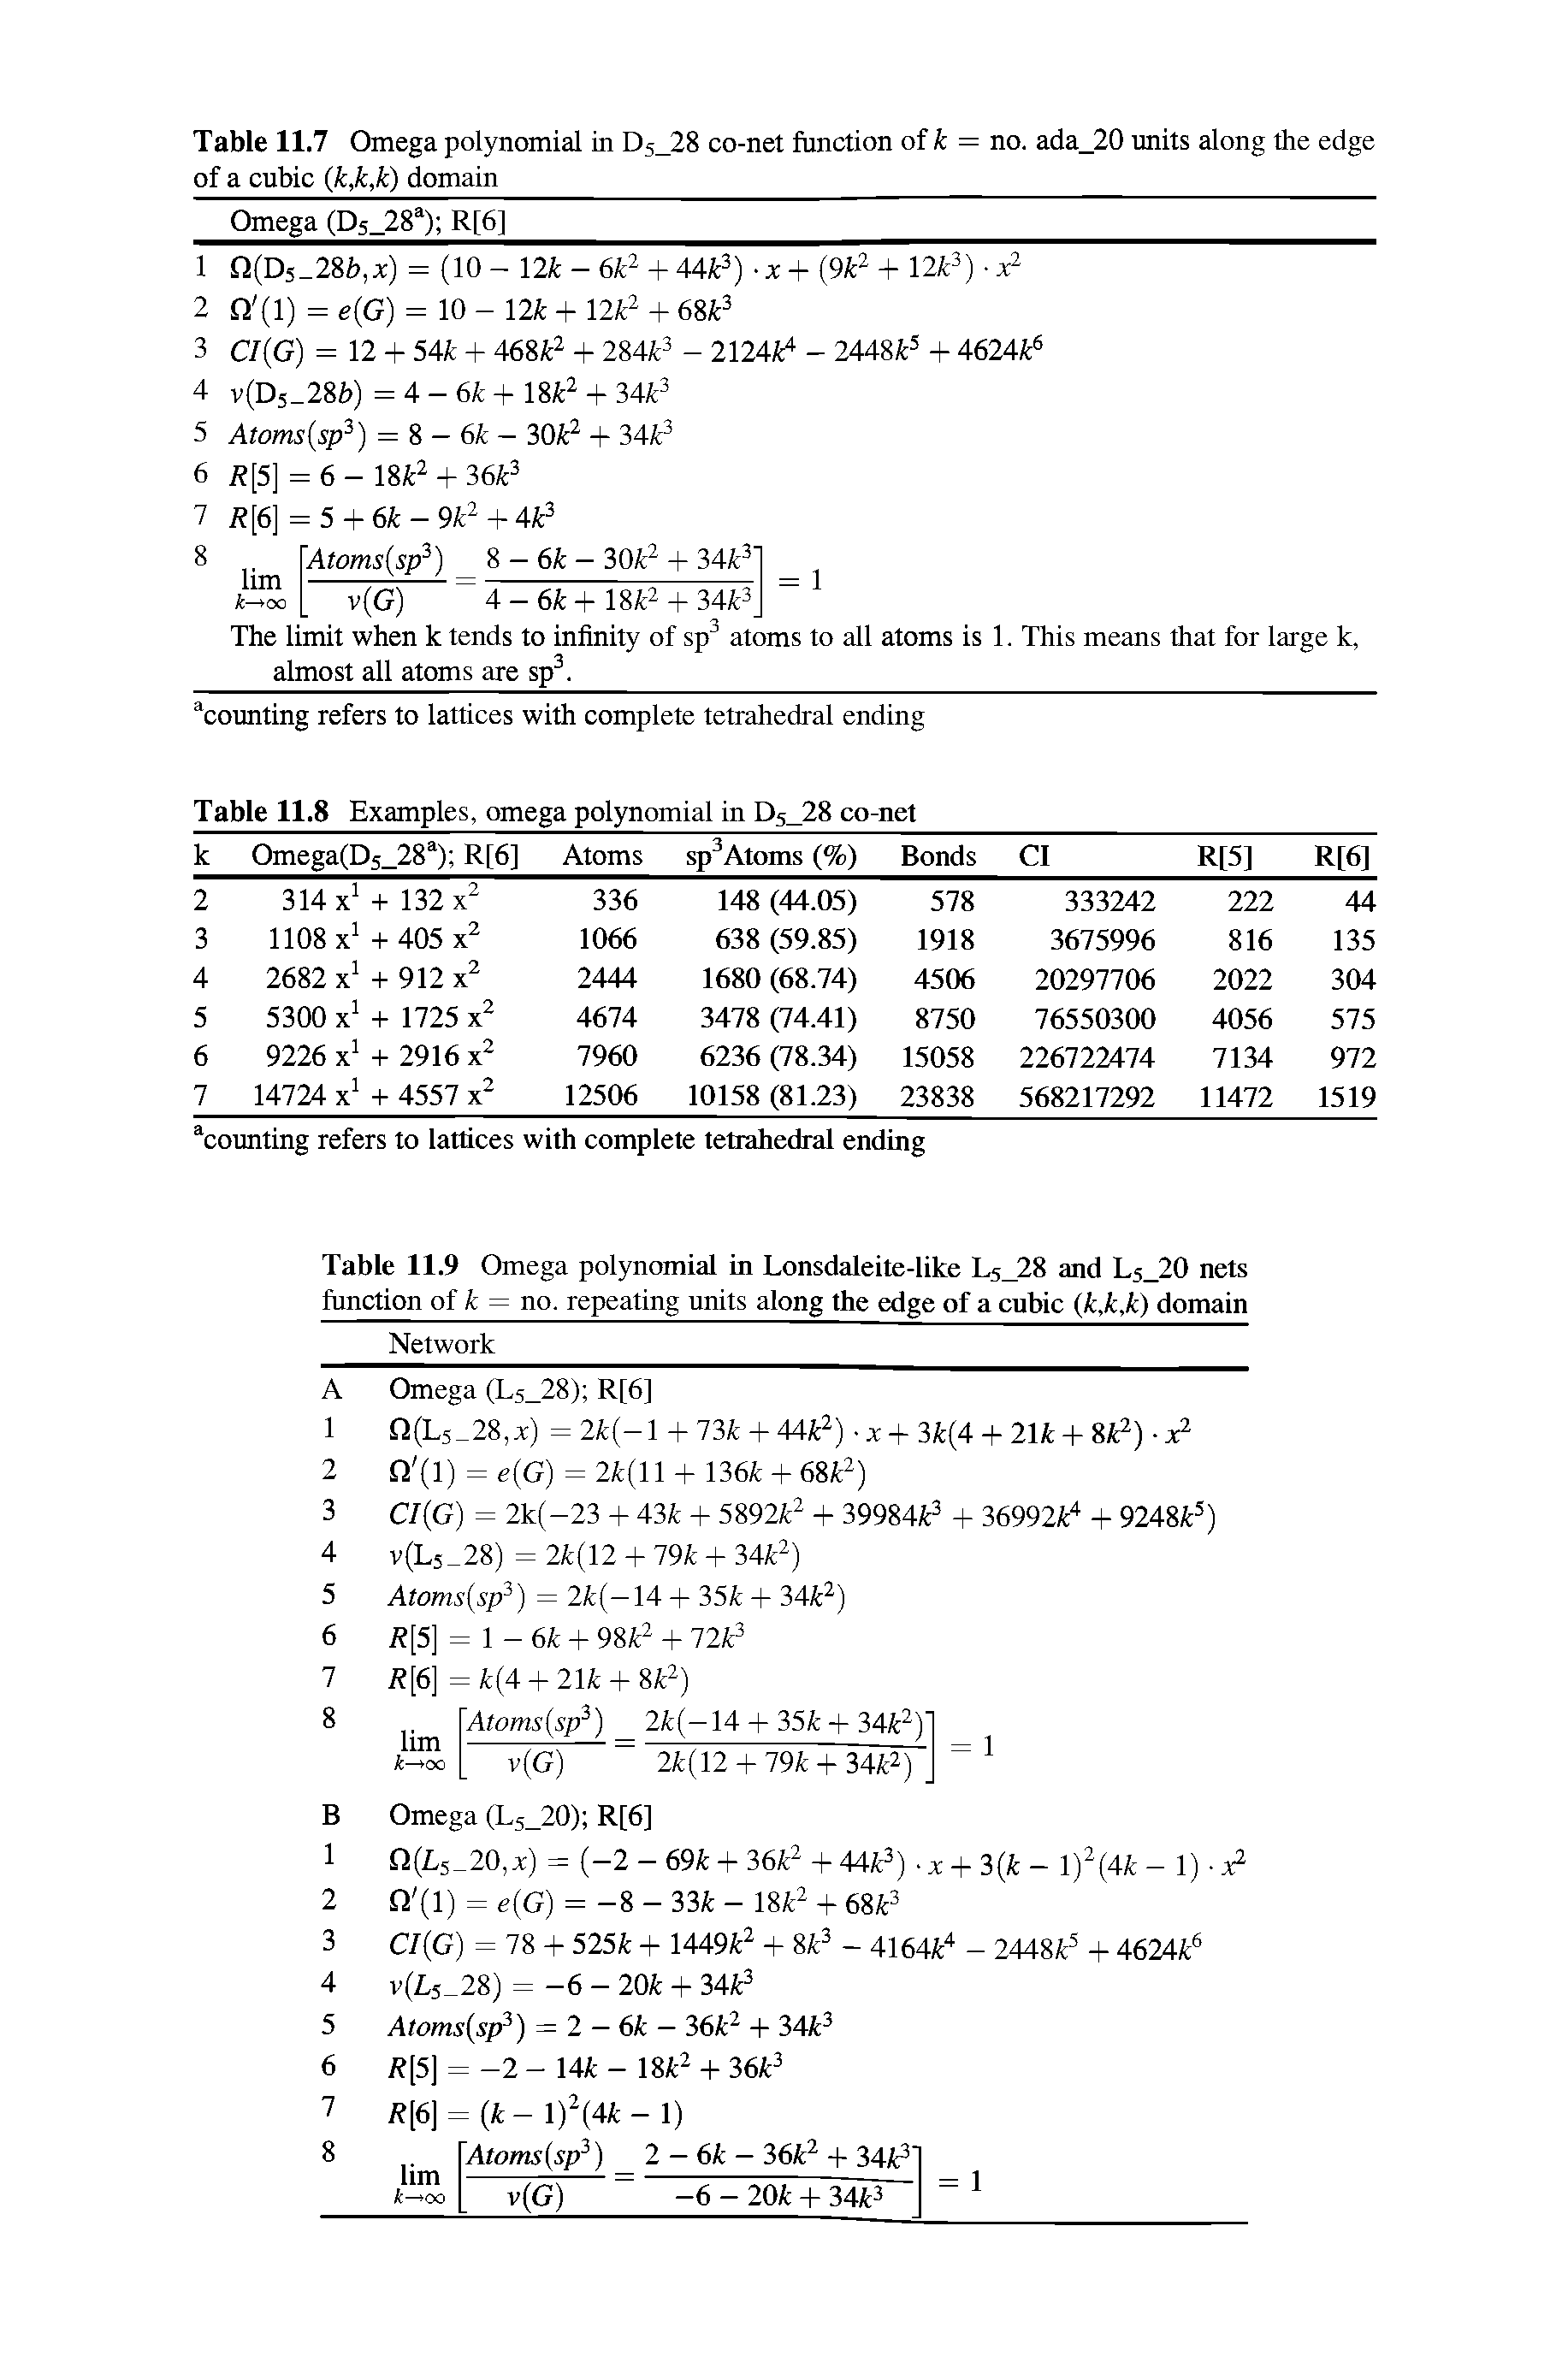 Table 11.9 Omega polynomial in Lonsdaleite-like L5 28 and L5 20 nets function of k = no. repeating units along the edge of a cubic jk,k,k) domain...